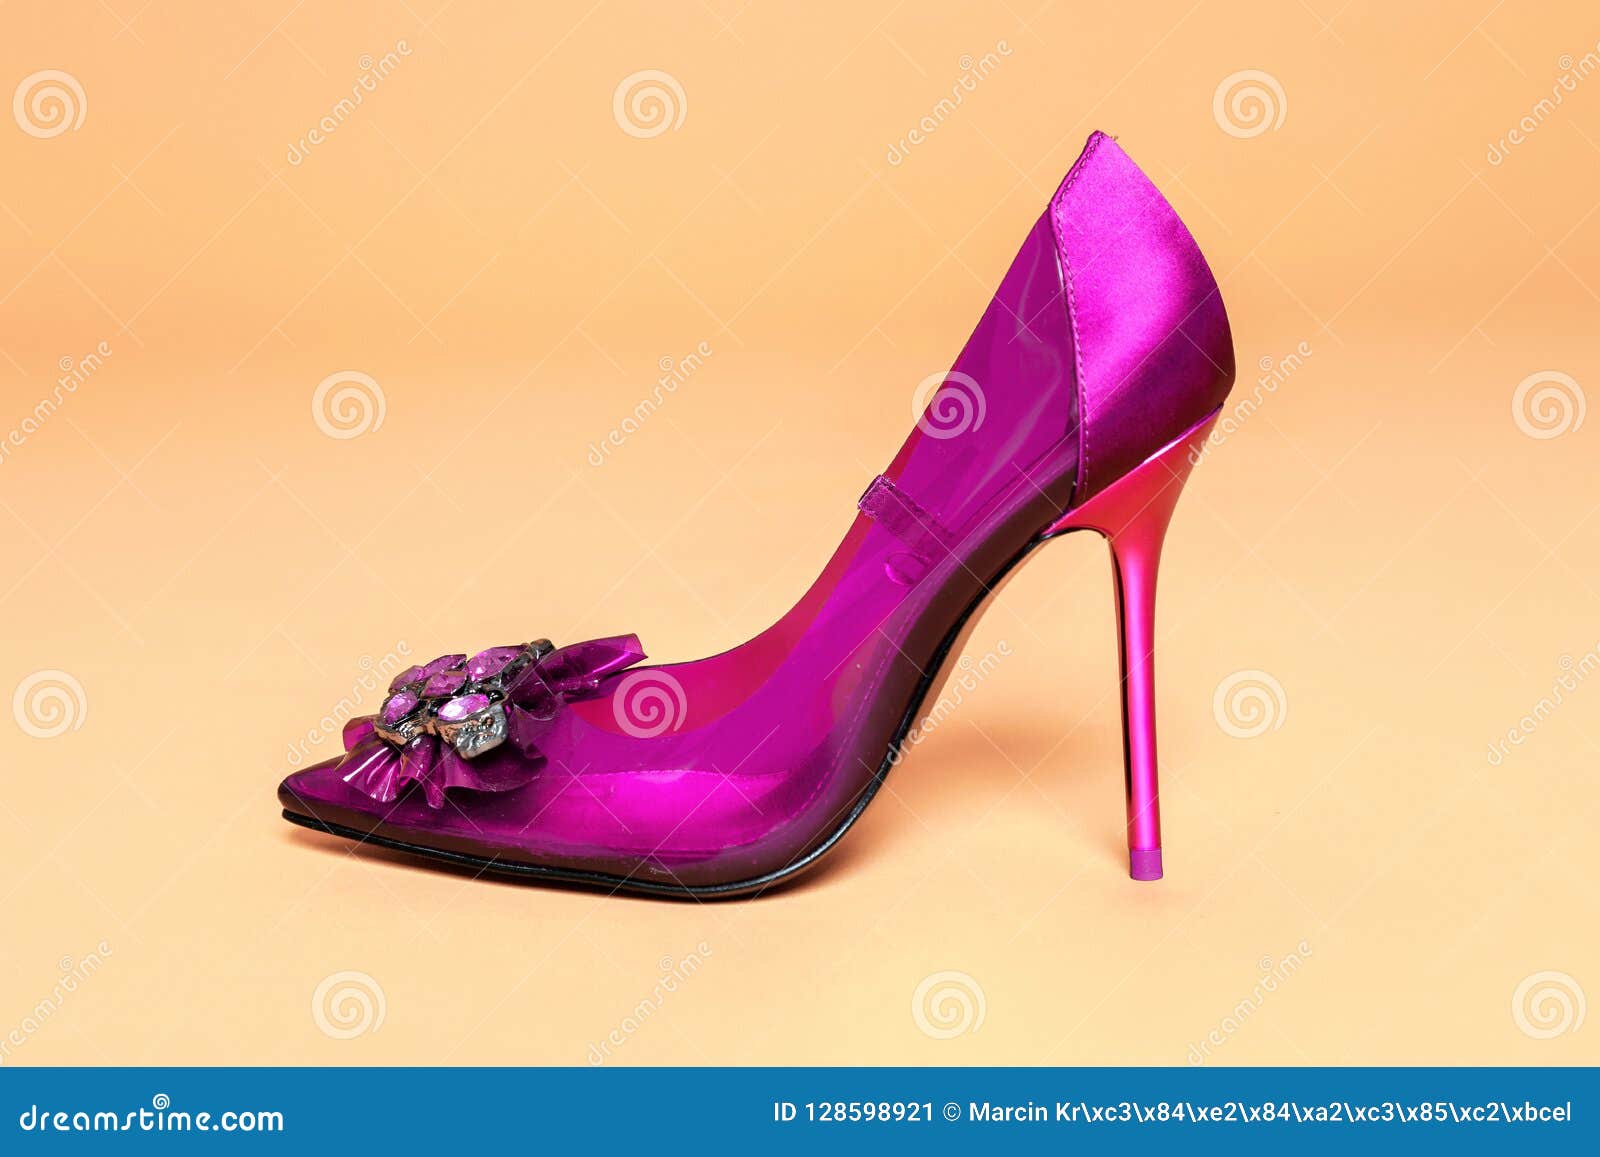 Elegant Women S Shoes With High Heel And Glamor Decorations On A